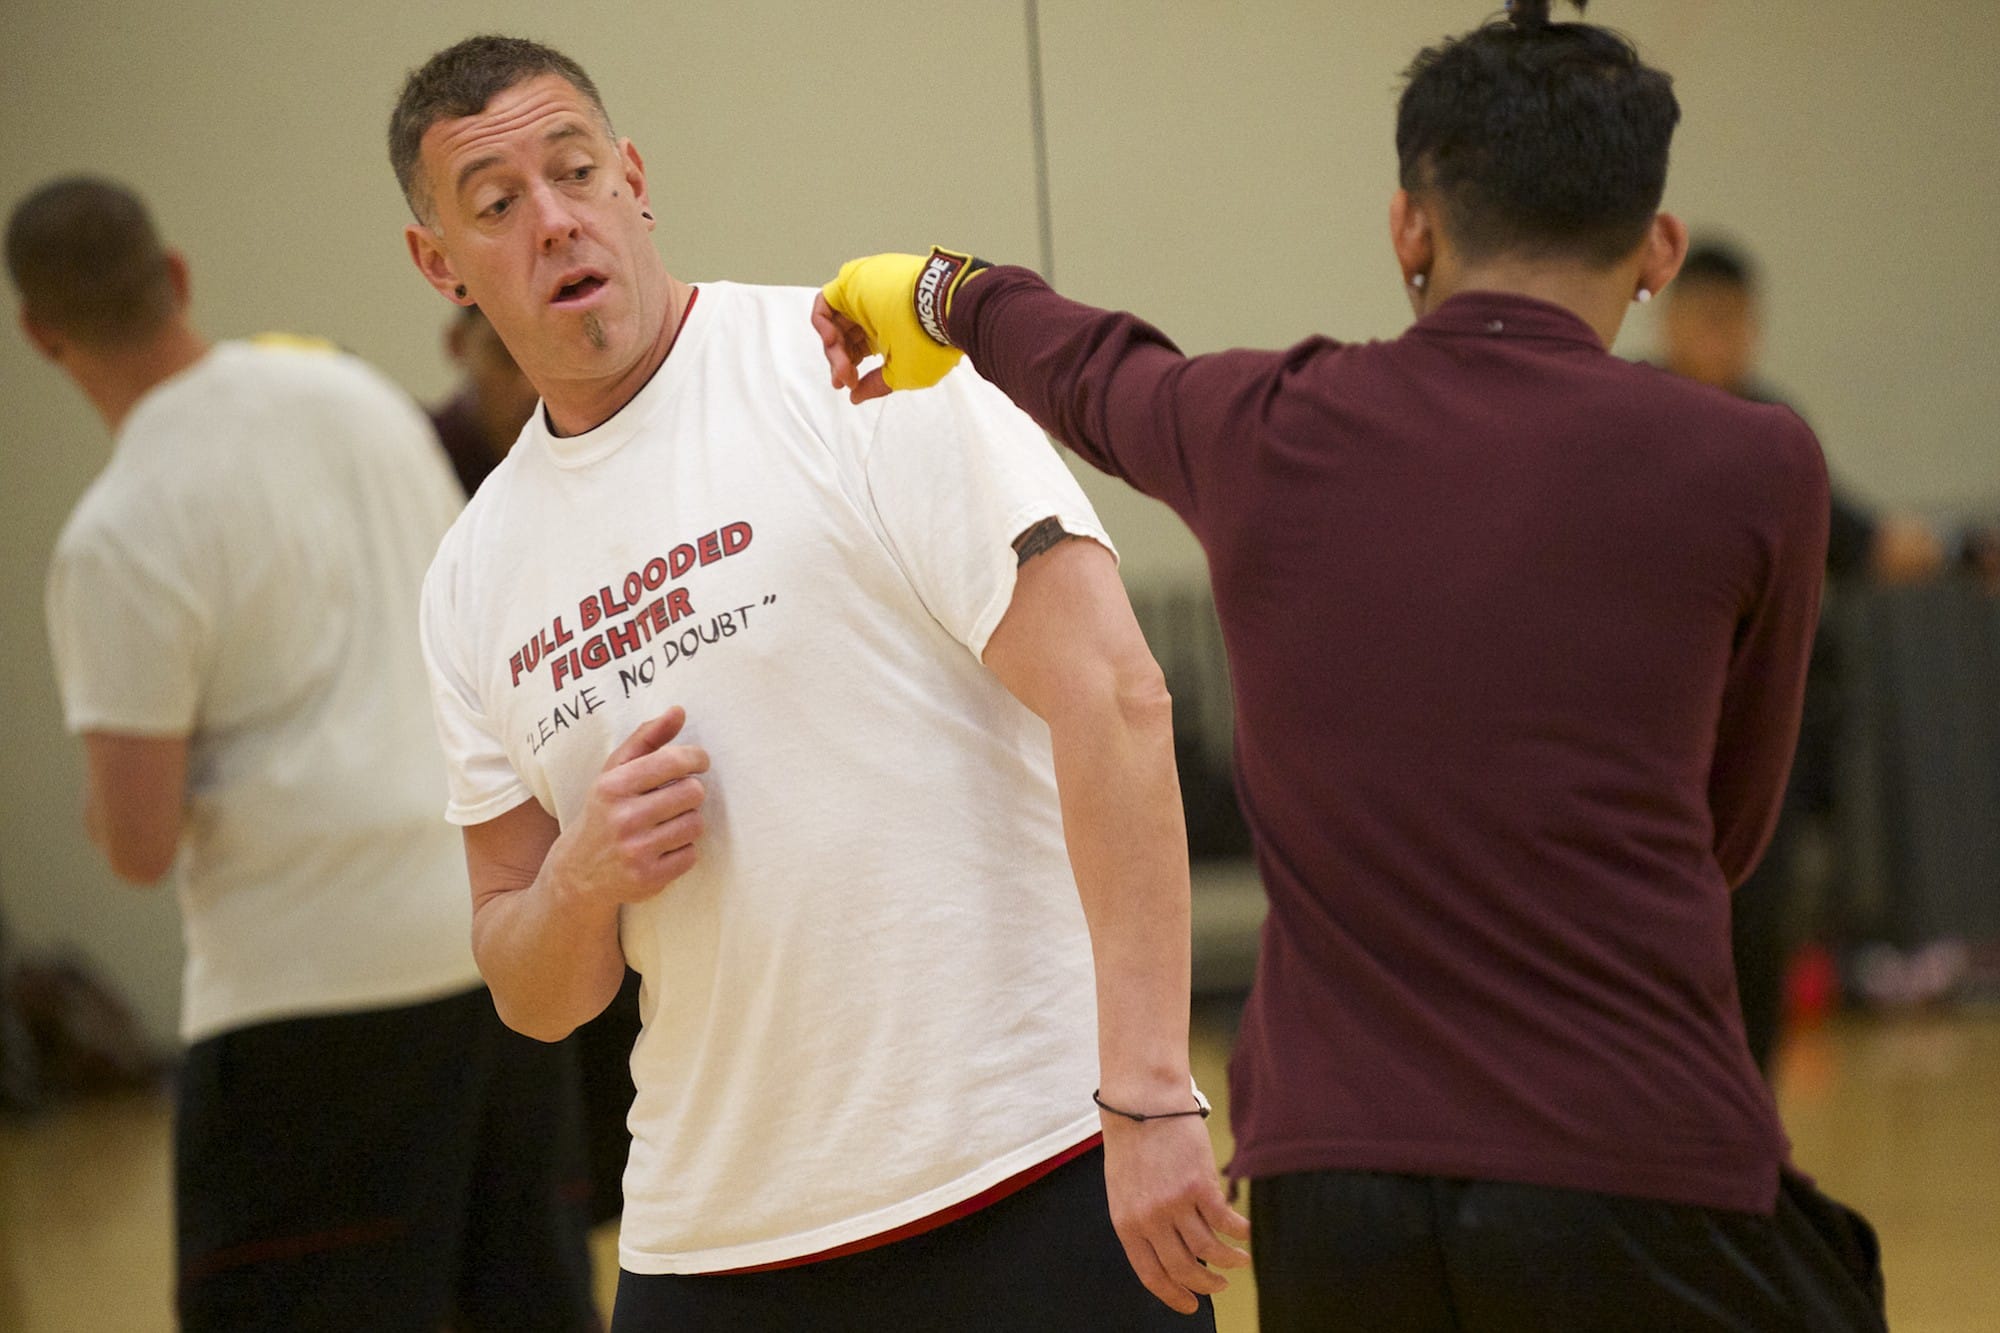 Tony Adams, founder of Mind Fitness Attitude Boxing instructs a boxing student during a Friday afternoon class at LA Fitness in Vancouver.